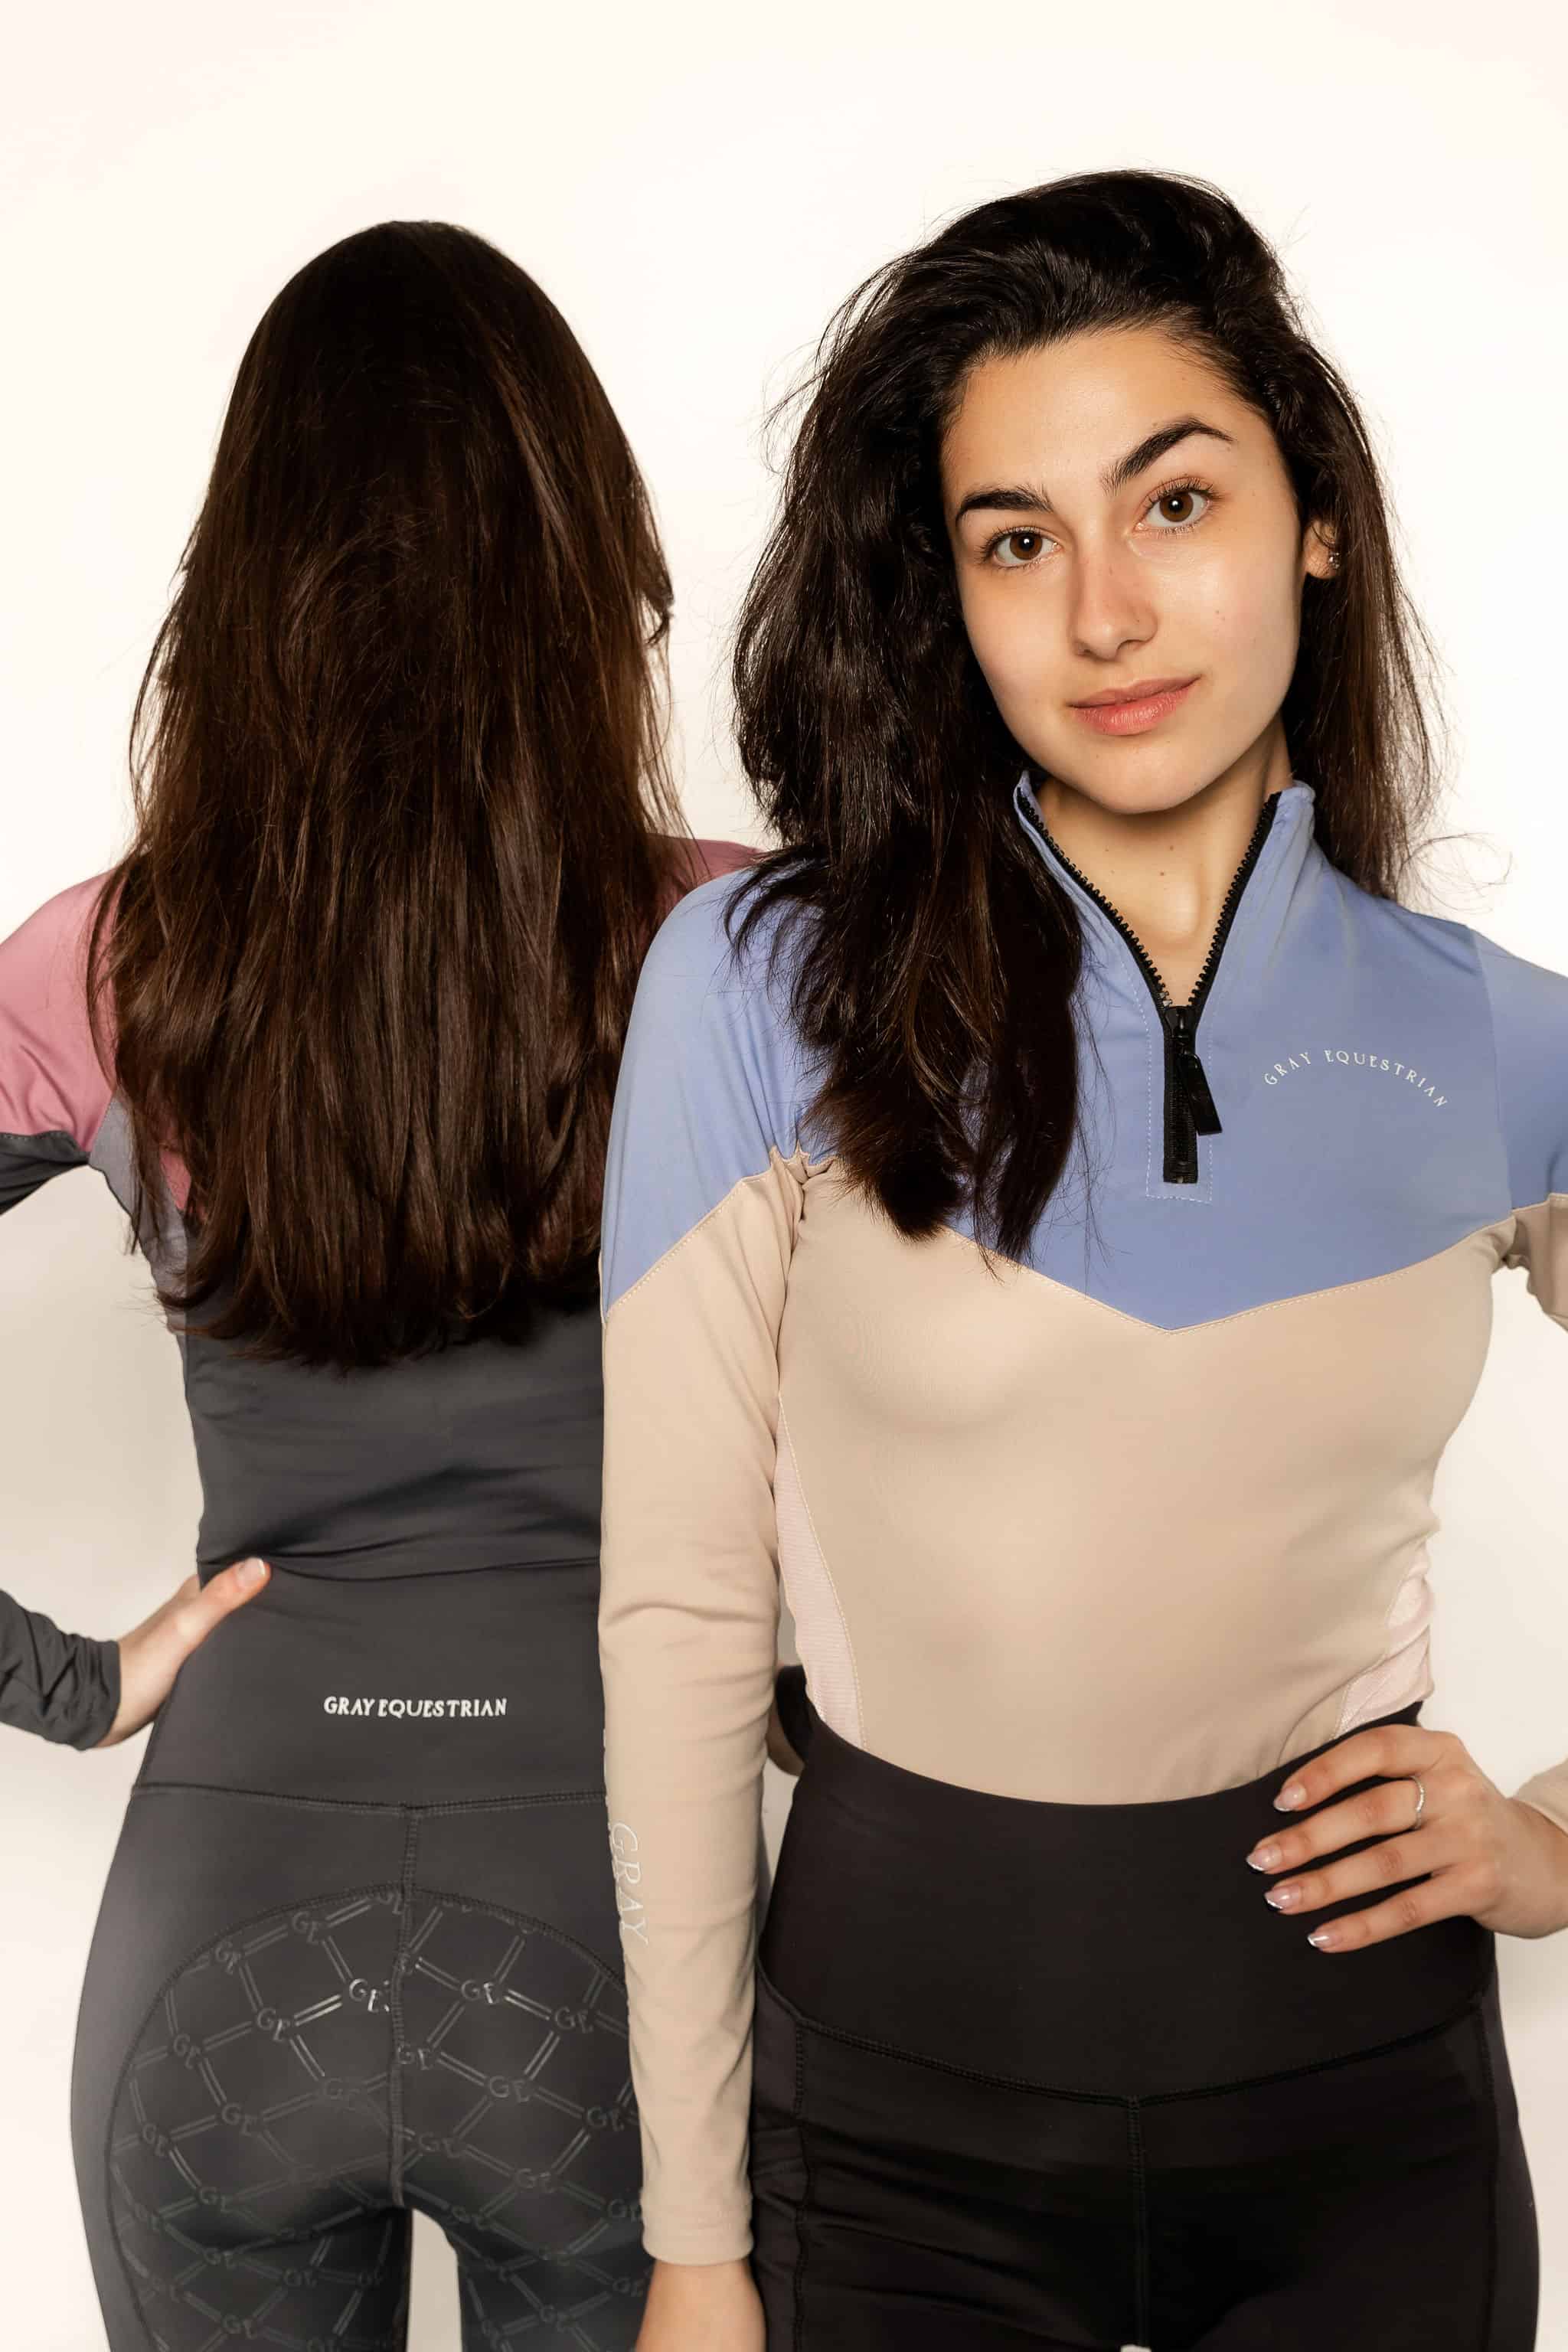 Two models wearing two tone equestrian base layers with 1/4 zip detail and mesh side panels.